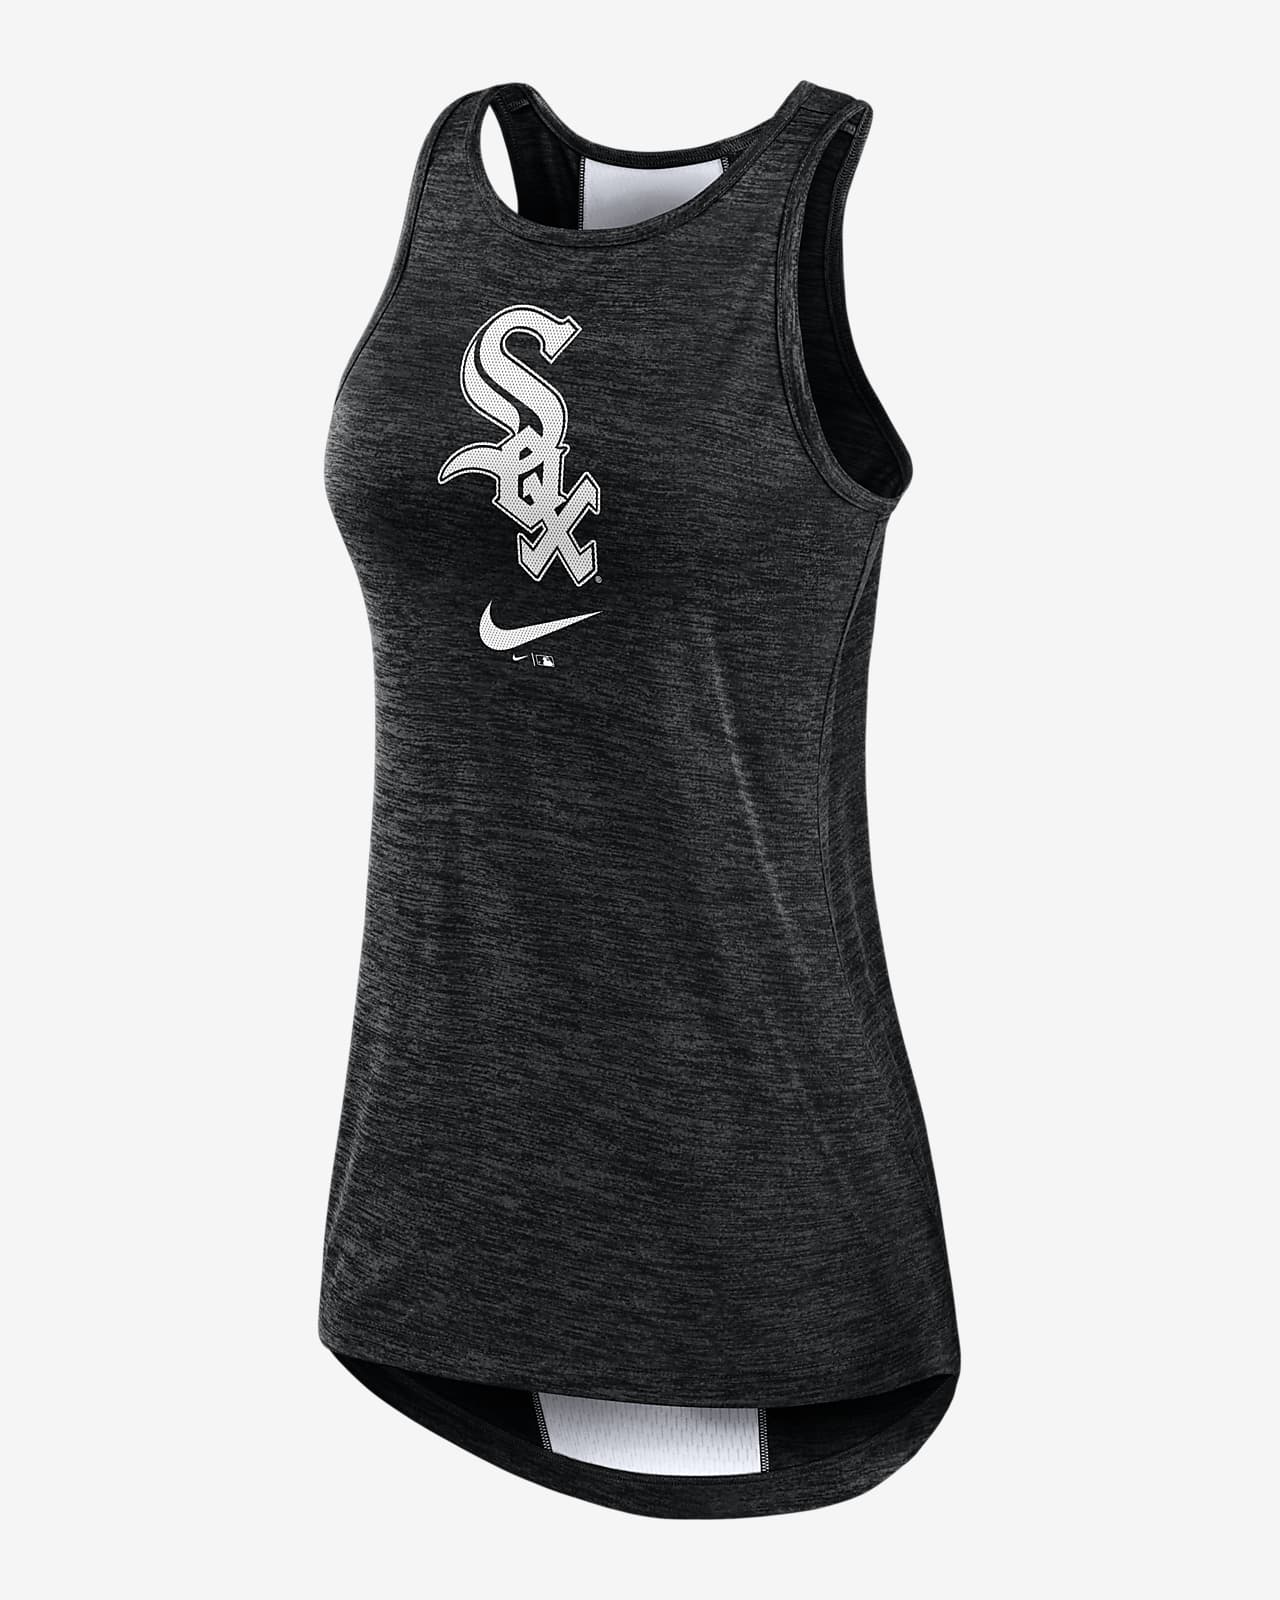 Nike Dri-FIT Right Mix (MLB Chicago White Sox) Women's High-Neck Tank Top